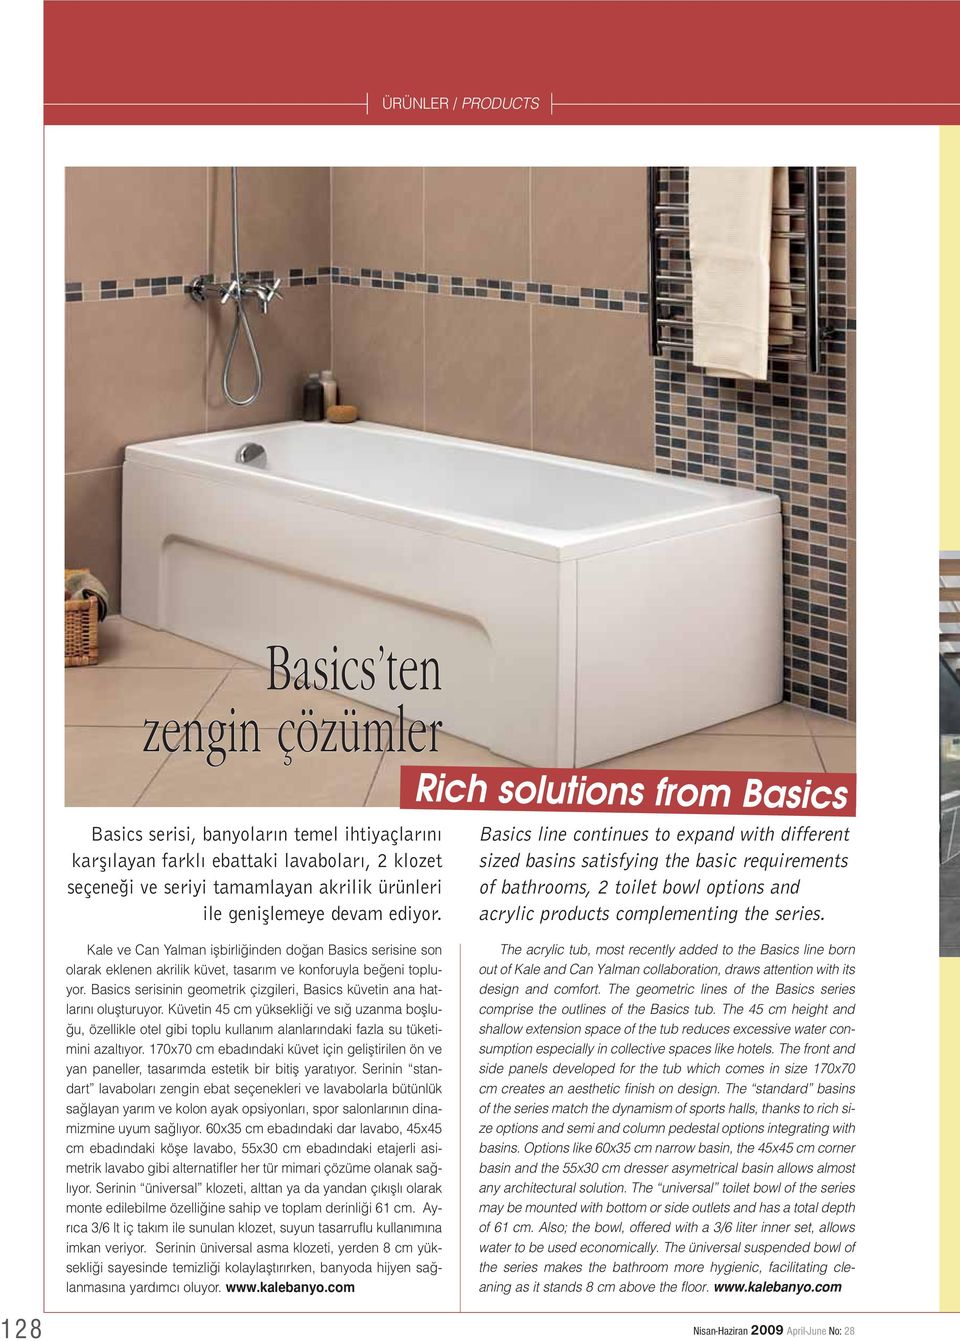 Rich solutions from Basics Basics line continues to expand with different sized basins satisfying the basic requirements of bathrooms, 2 toilet bowl options and acrylic products complementing the